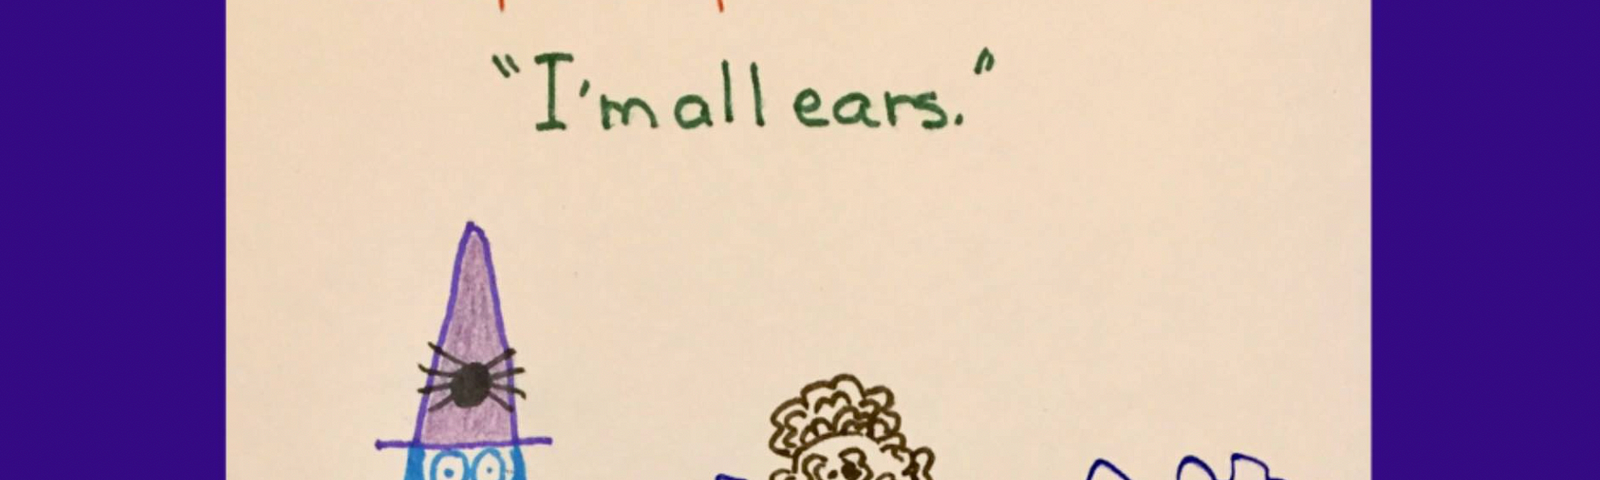 Cartoon Witch says “I’m all ears” is a stupid expression. Shows a little person who is made of a lot of ears.